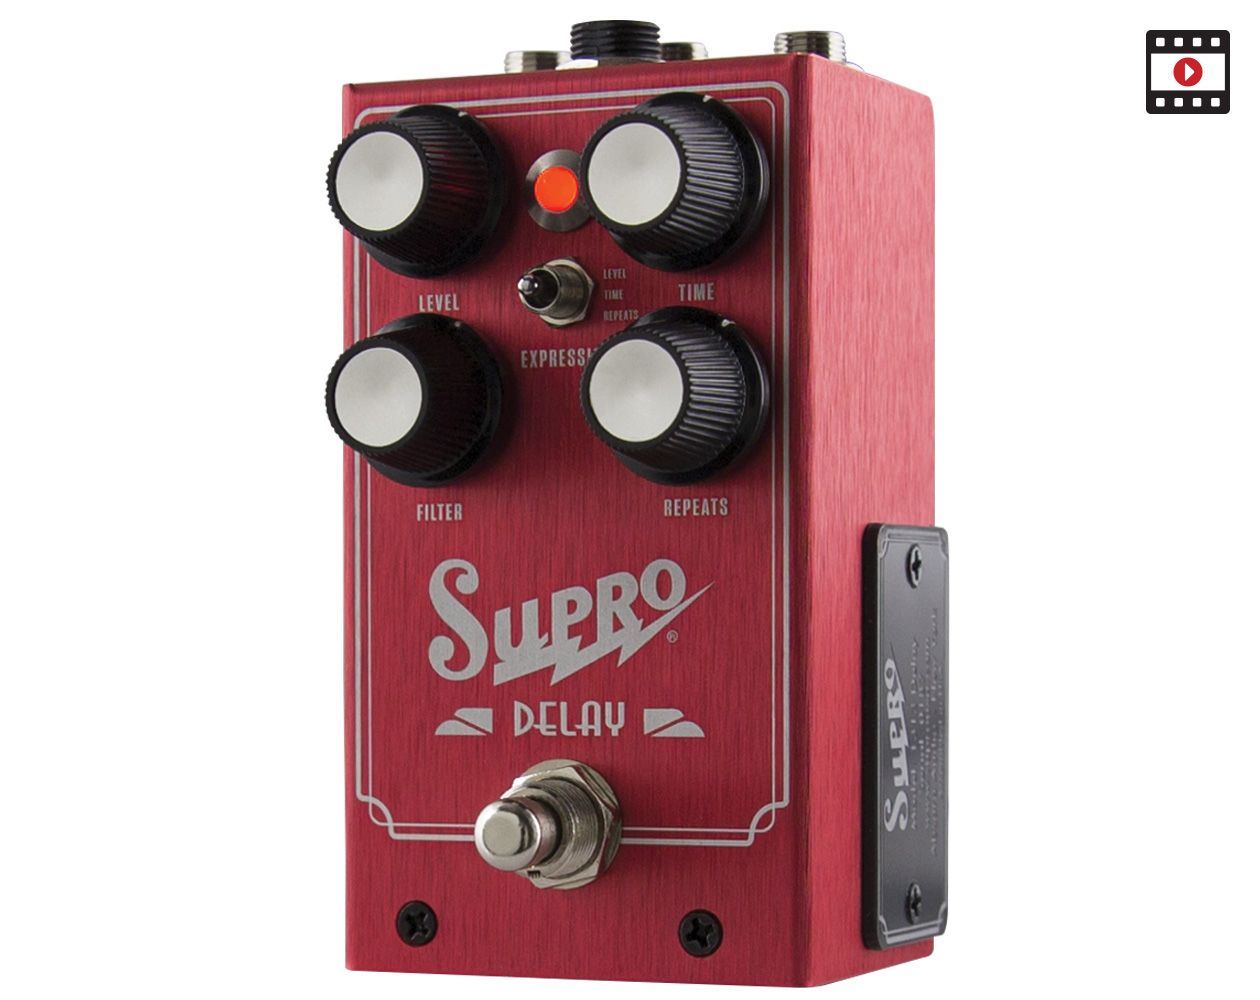 Supro Delay Review